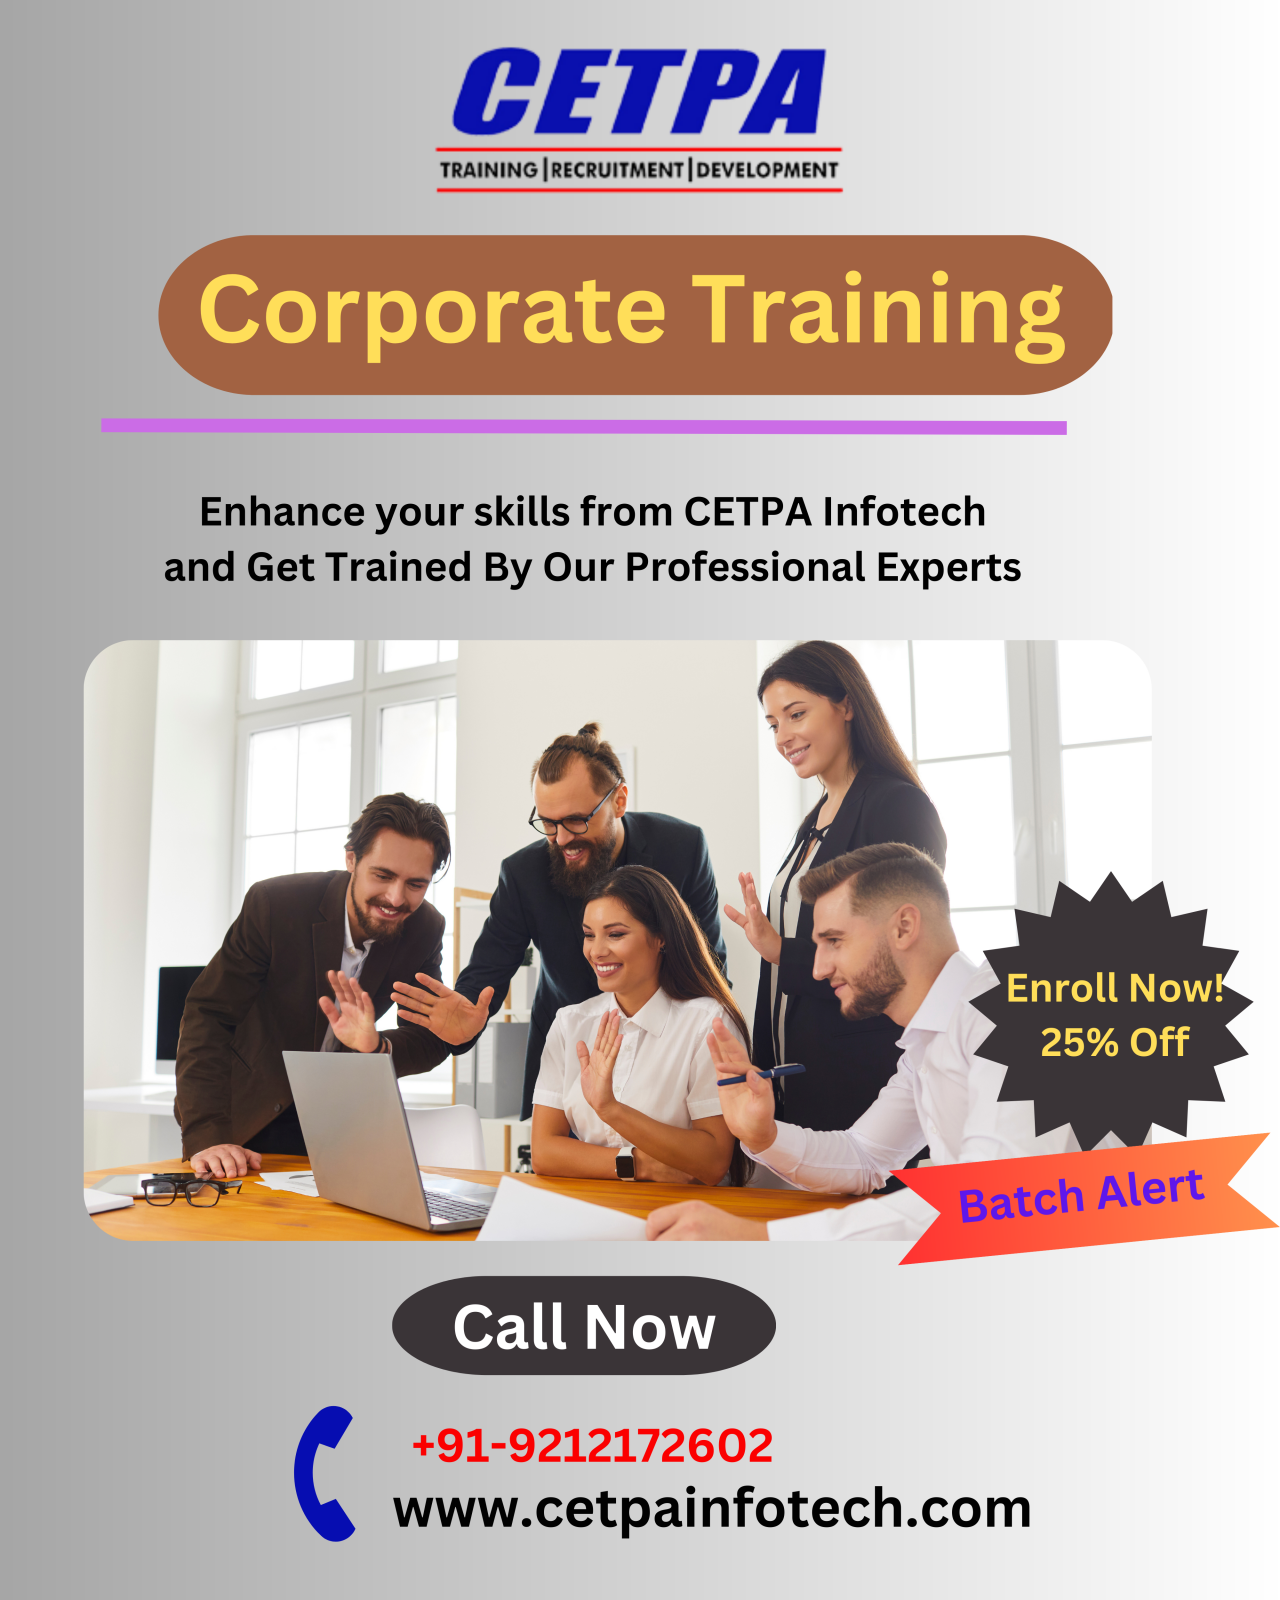 Boost Your Career with Corporate Training - Enroll now